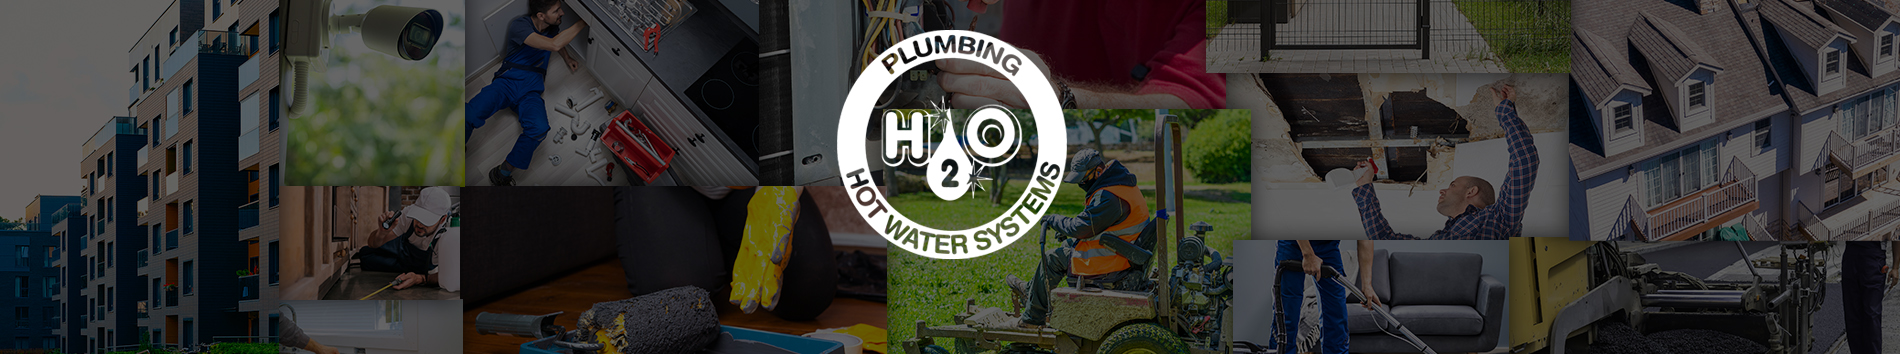 H2O Plumbing and Hot Water Systems